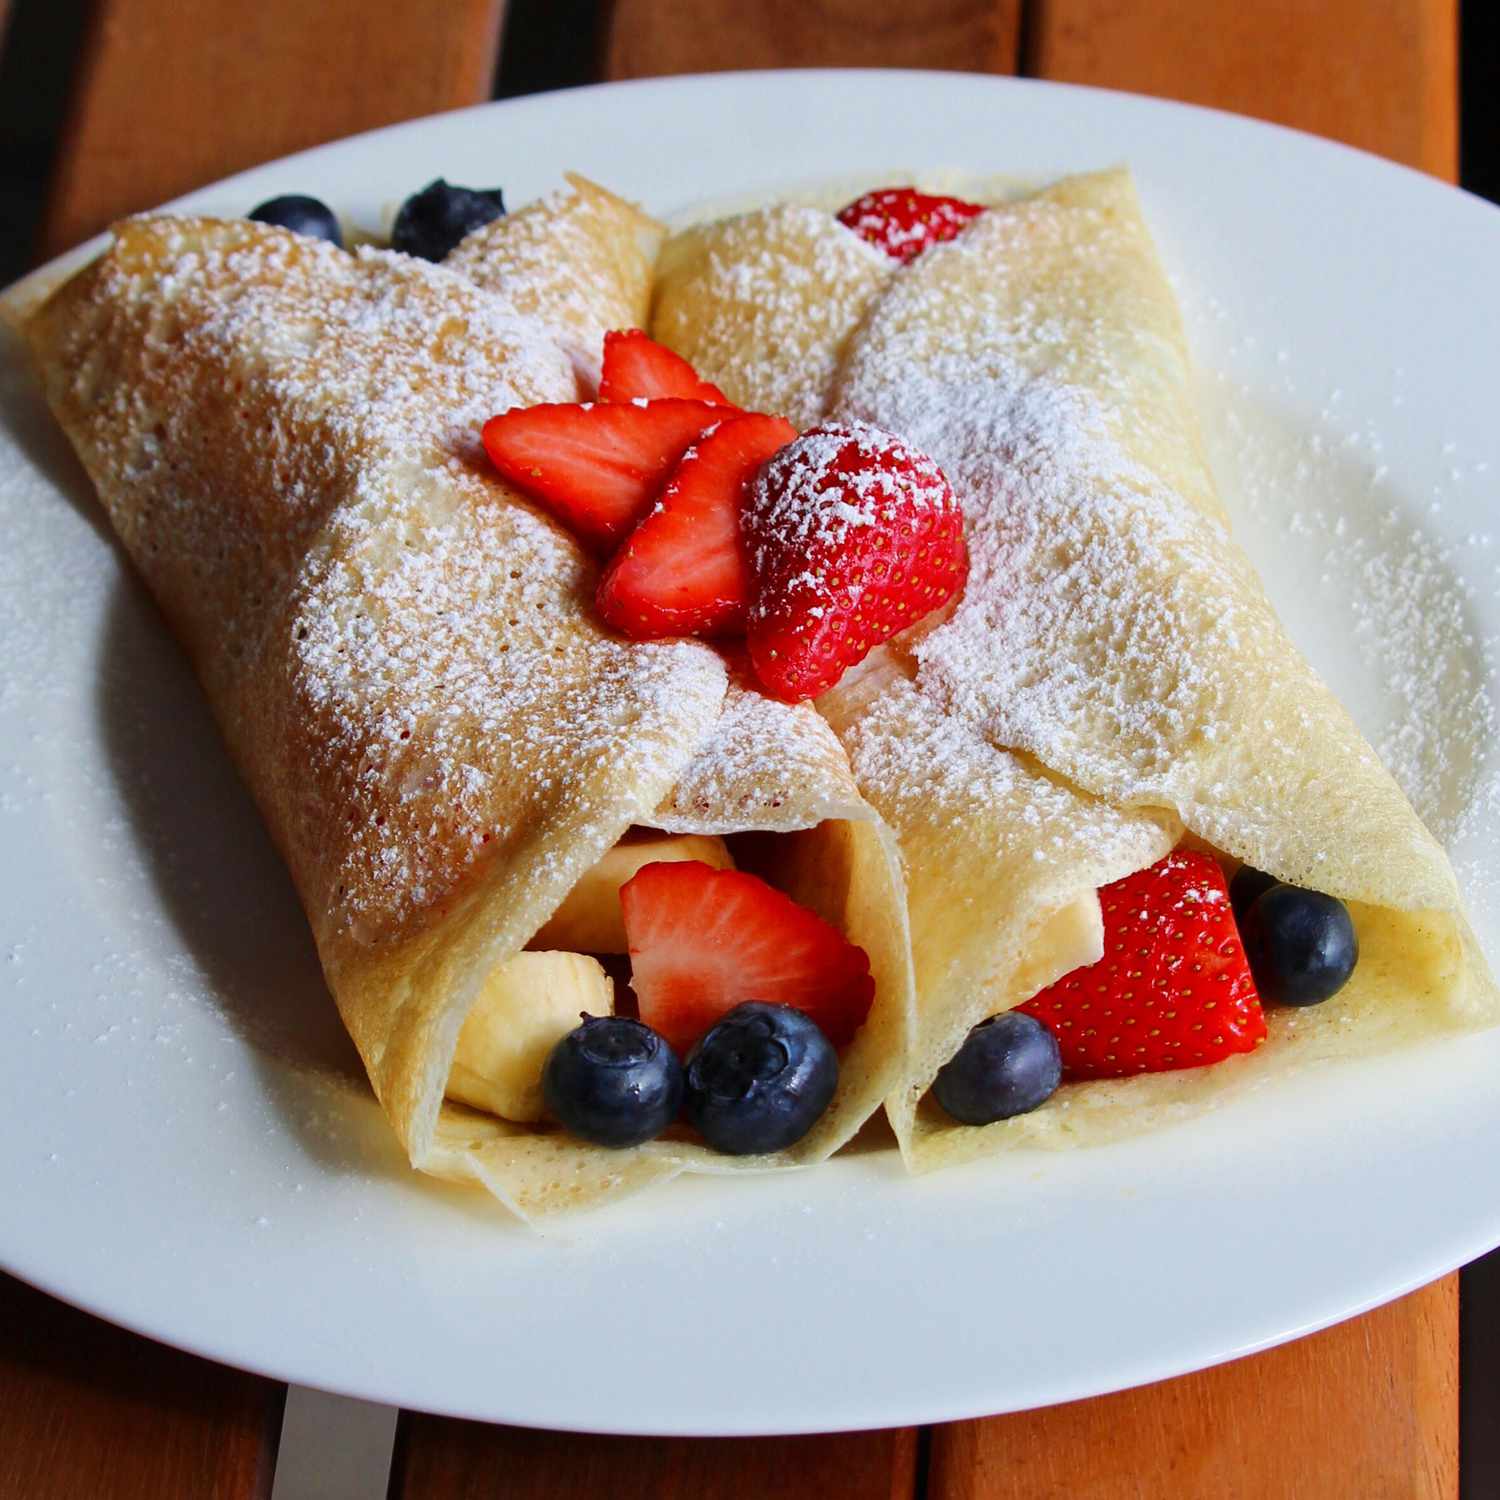 close up view of Dessert Crepes on a plate, topped with powdered sugar and berries